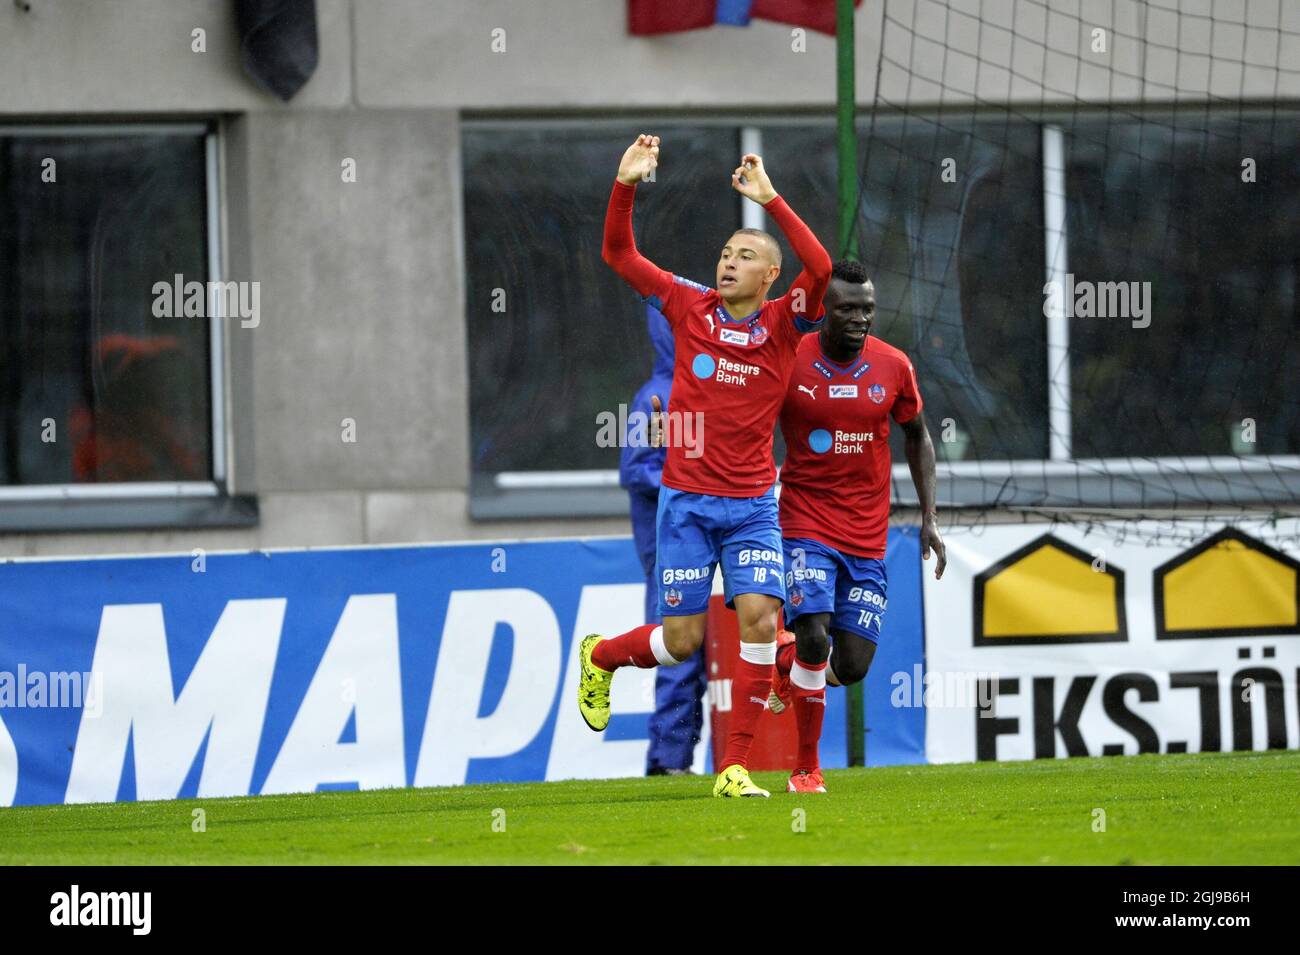 2015-07-19 Helsingborgs Jordan Larsson celebrates 2-1 goal in Swedish first league soccer match at Olympia in Helsingborg in southern Sweden, on July 19, 2015. Photo: Lindgren / / code 9204 Stock Photo - Alamy